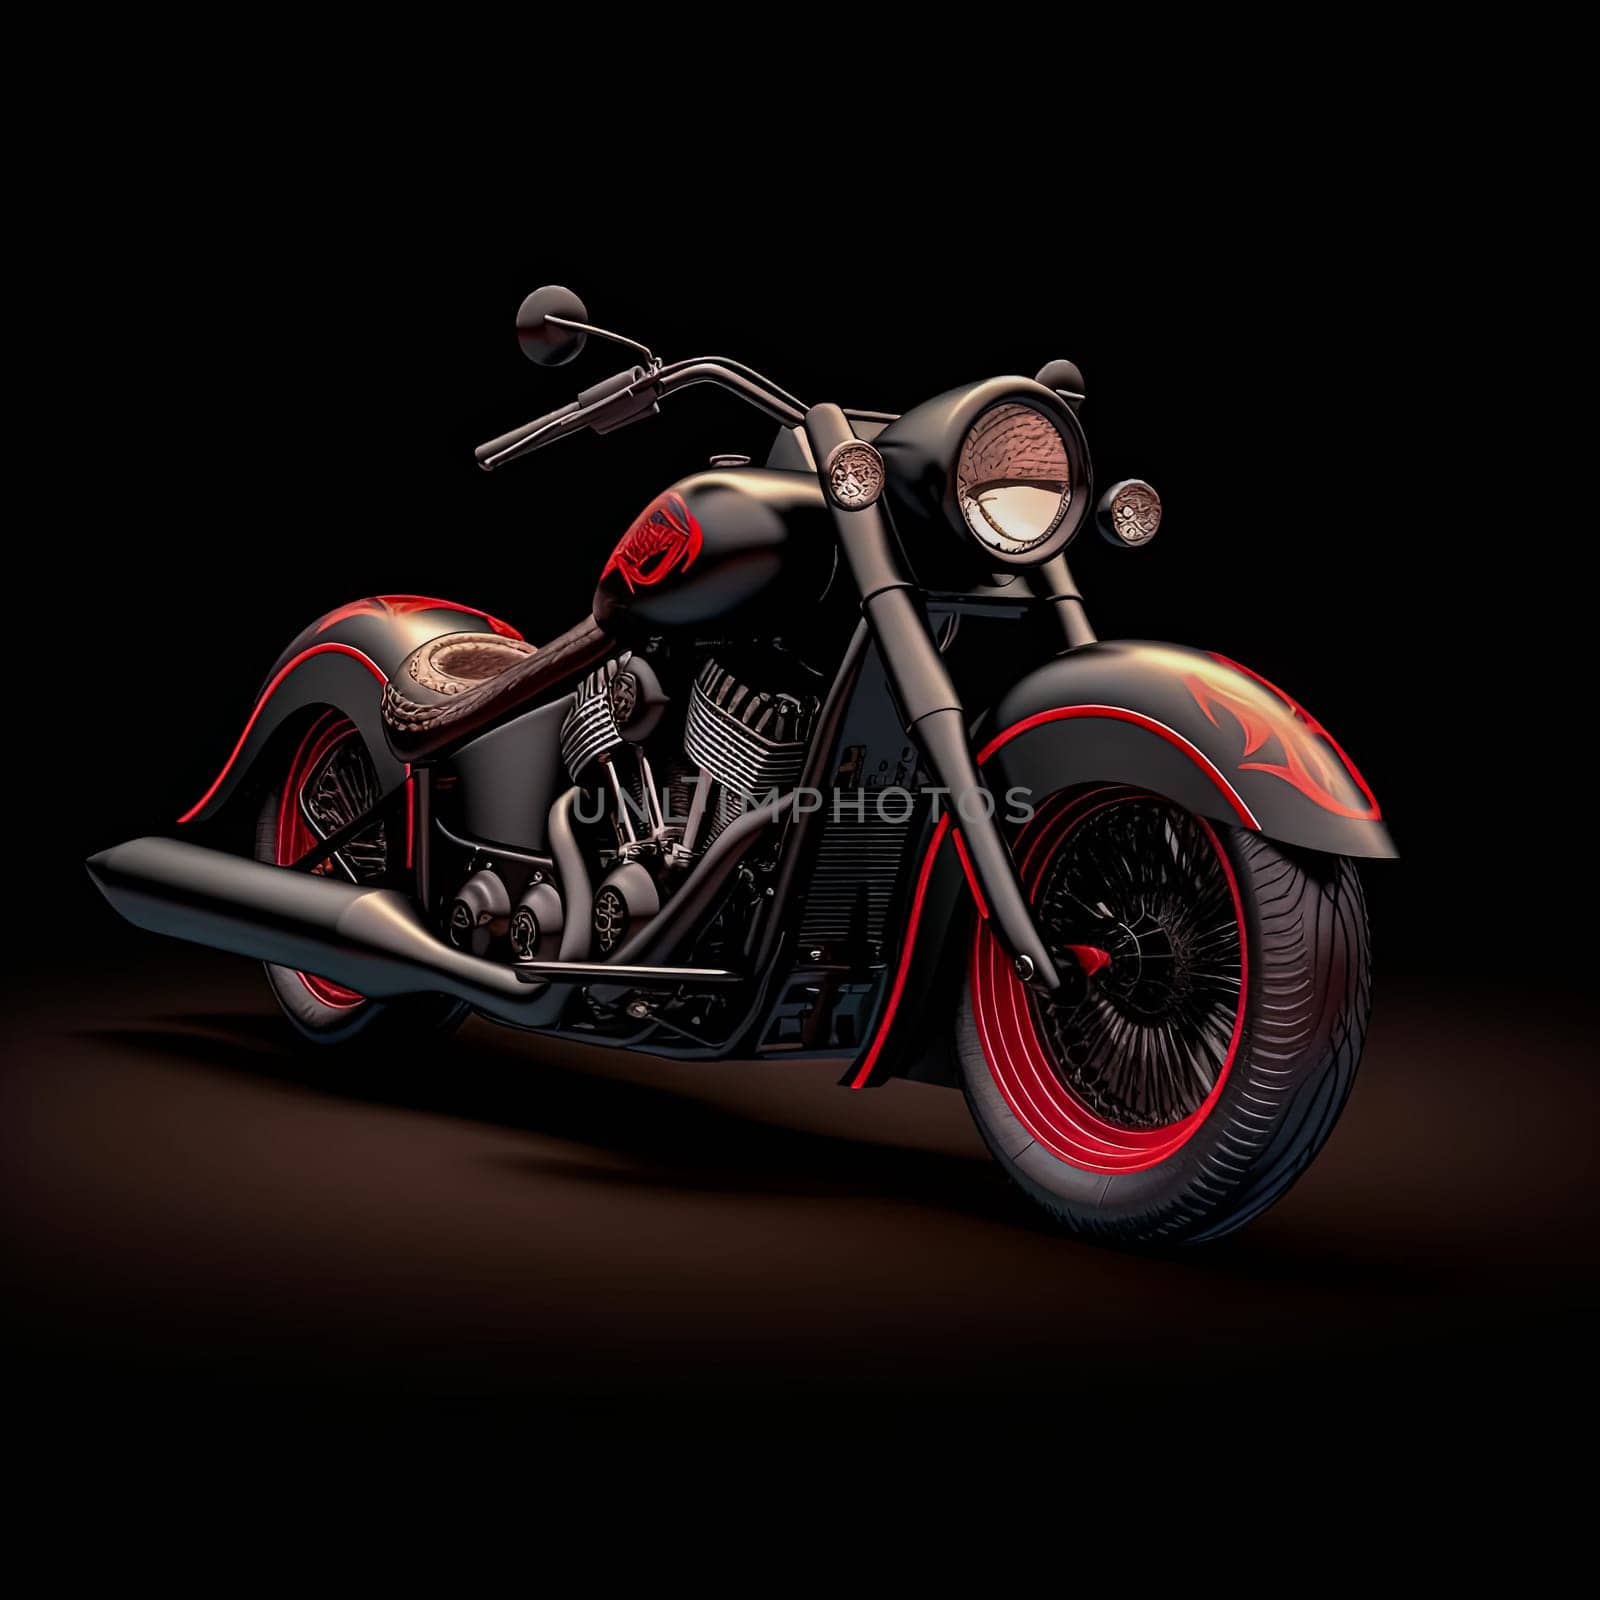 A black motorcycle with red accents is parked in front of a dark background. The motorcycle is the main focus of the image, and it is a custom or modified bike